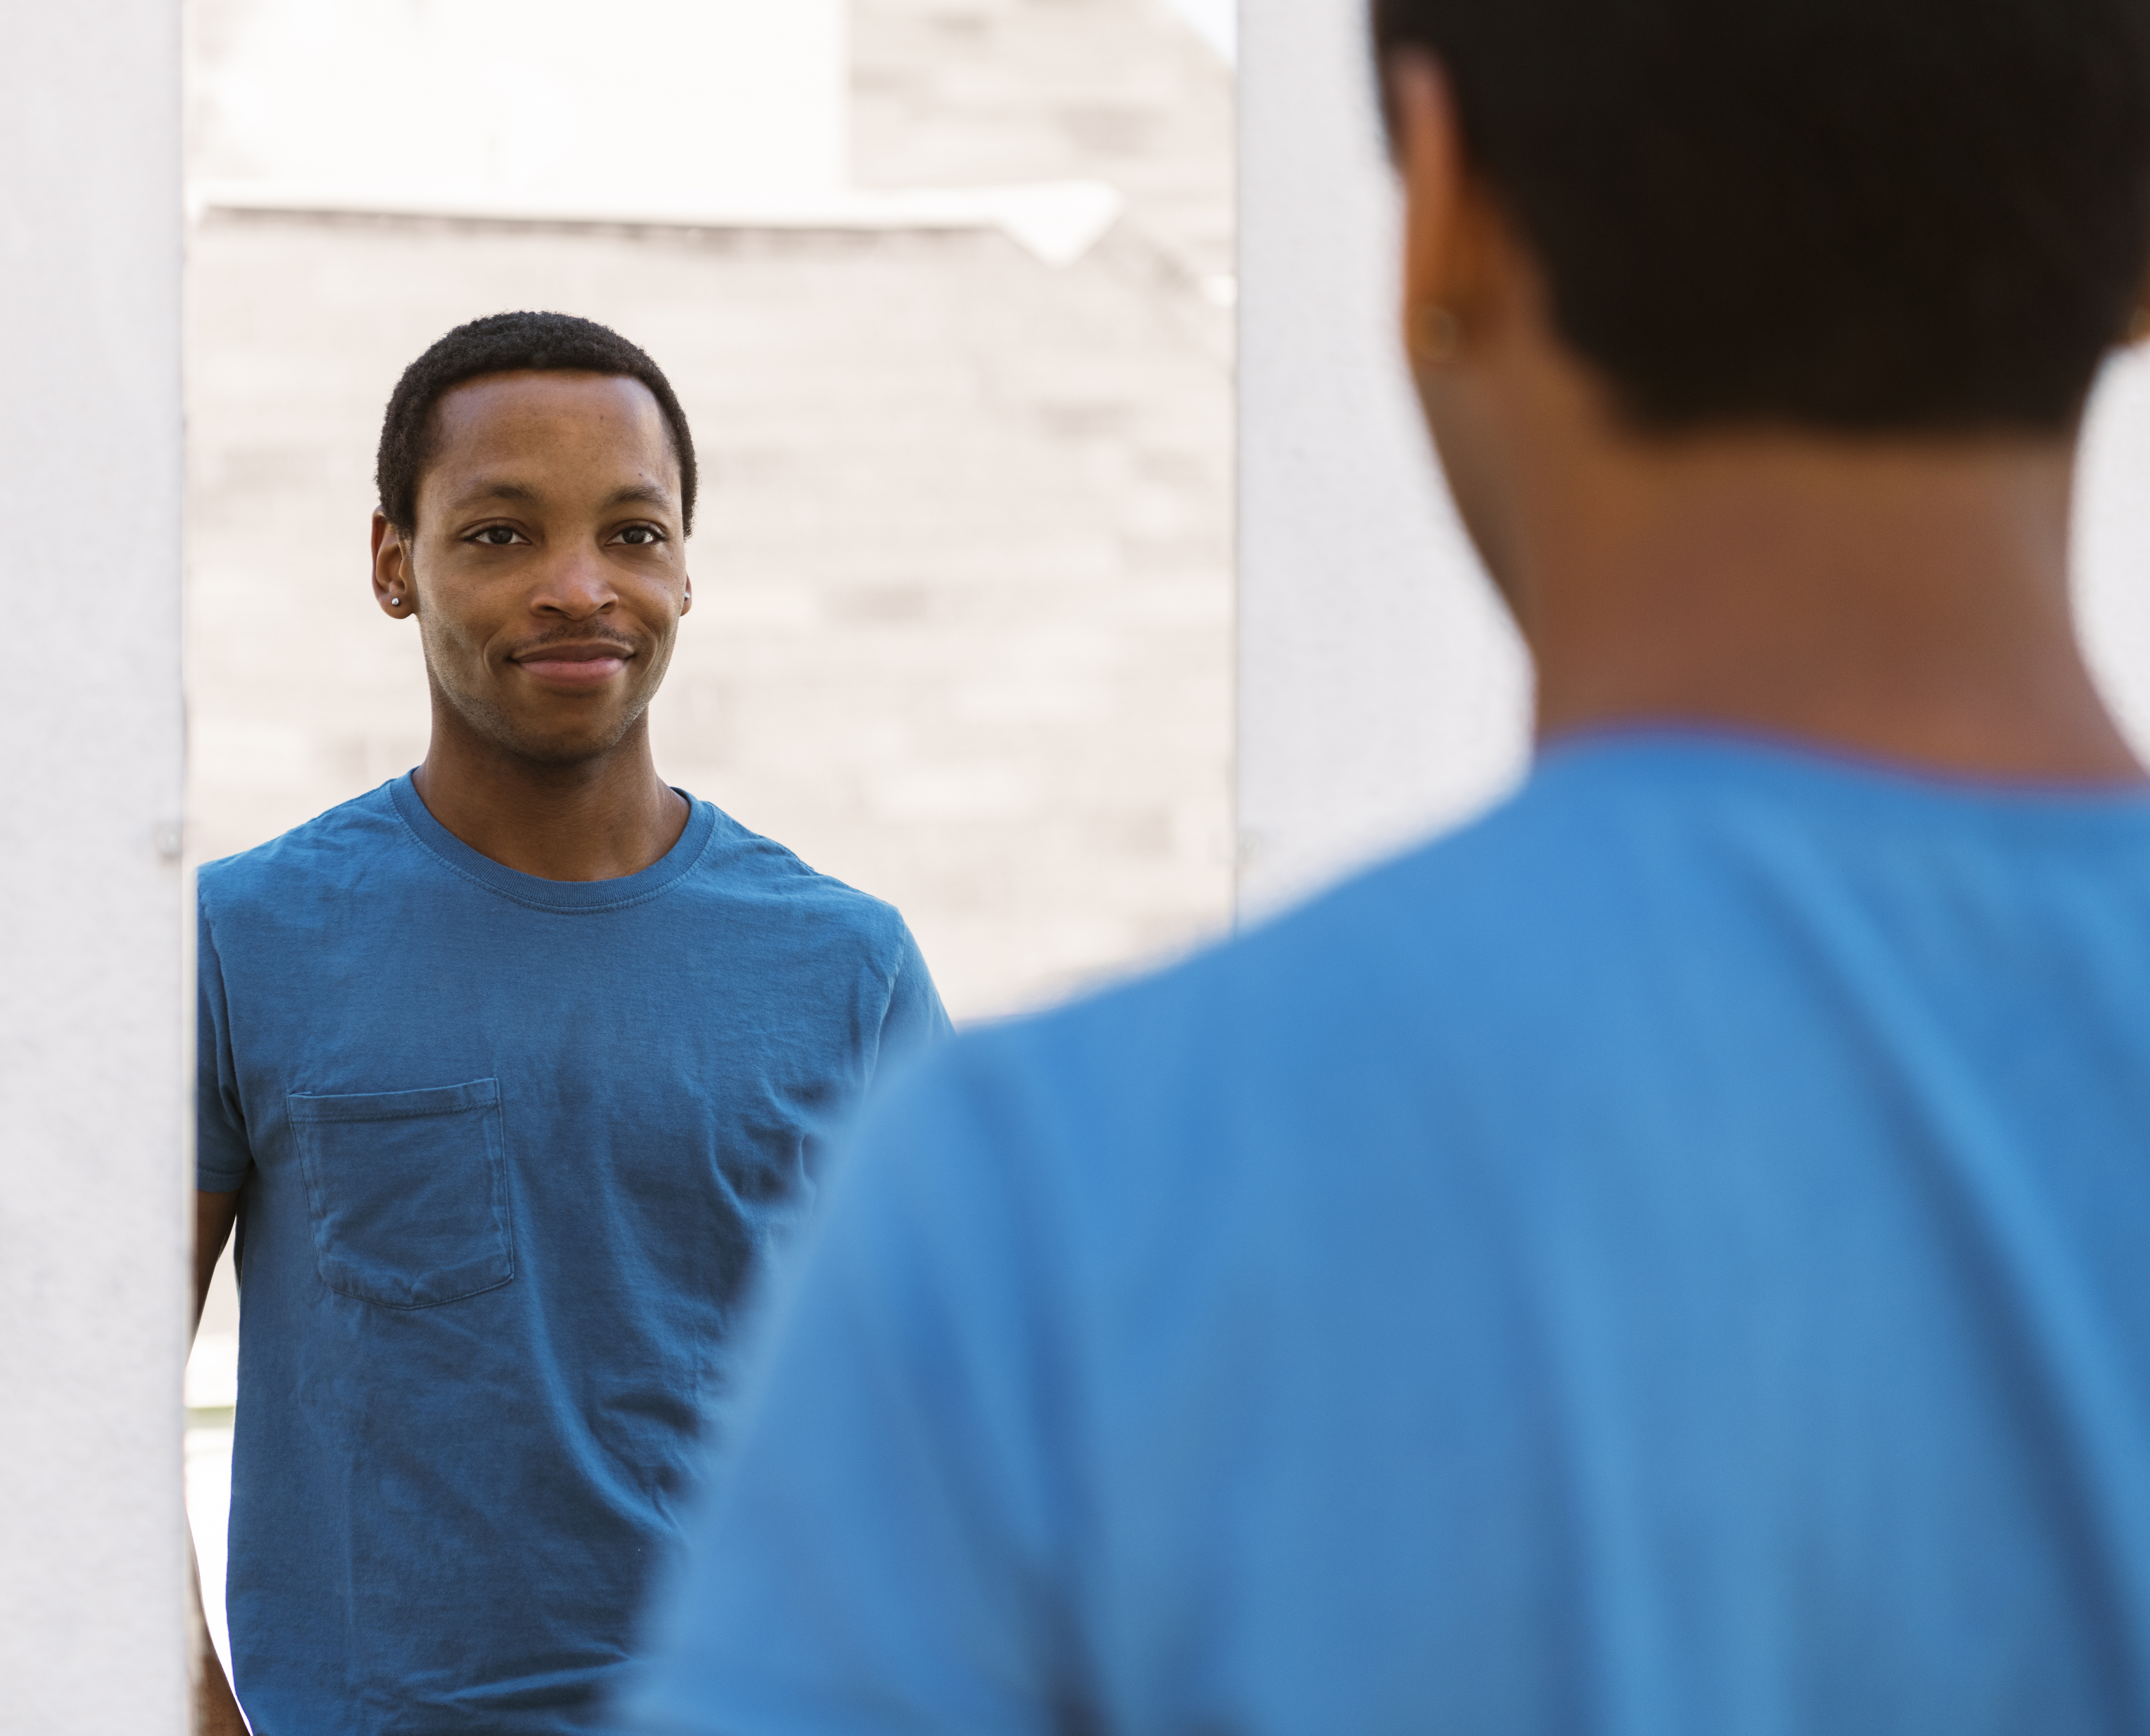 Smiling man looking at reflection in mirror